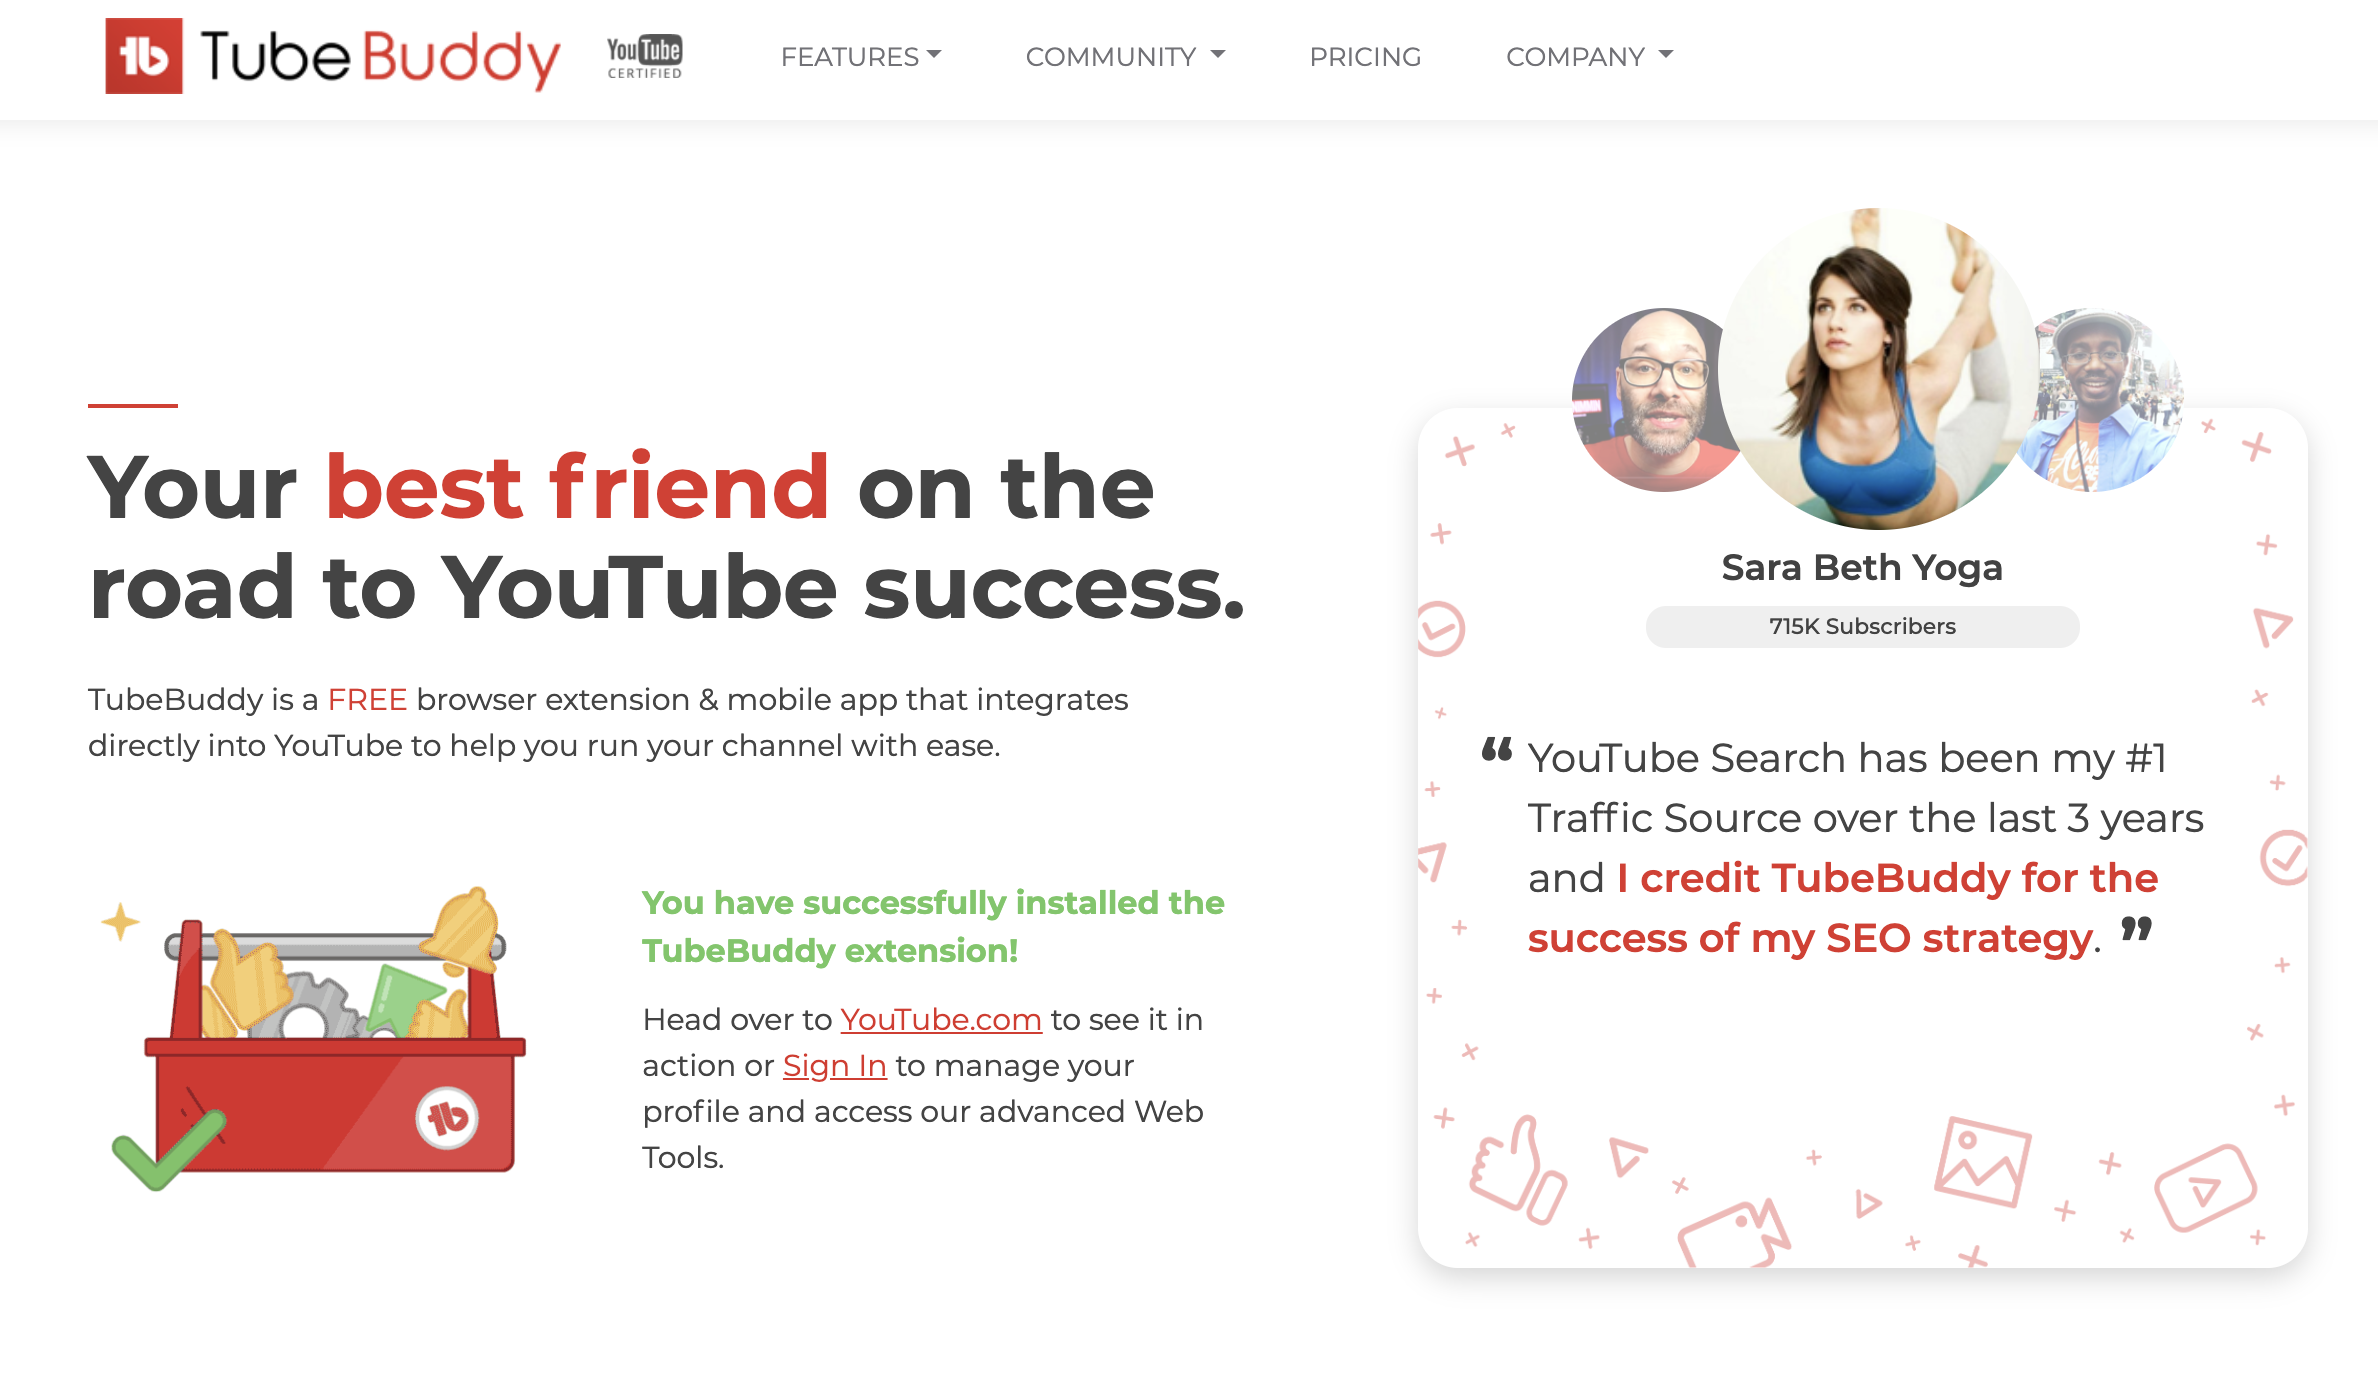 tubebuddy overview